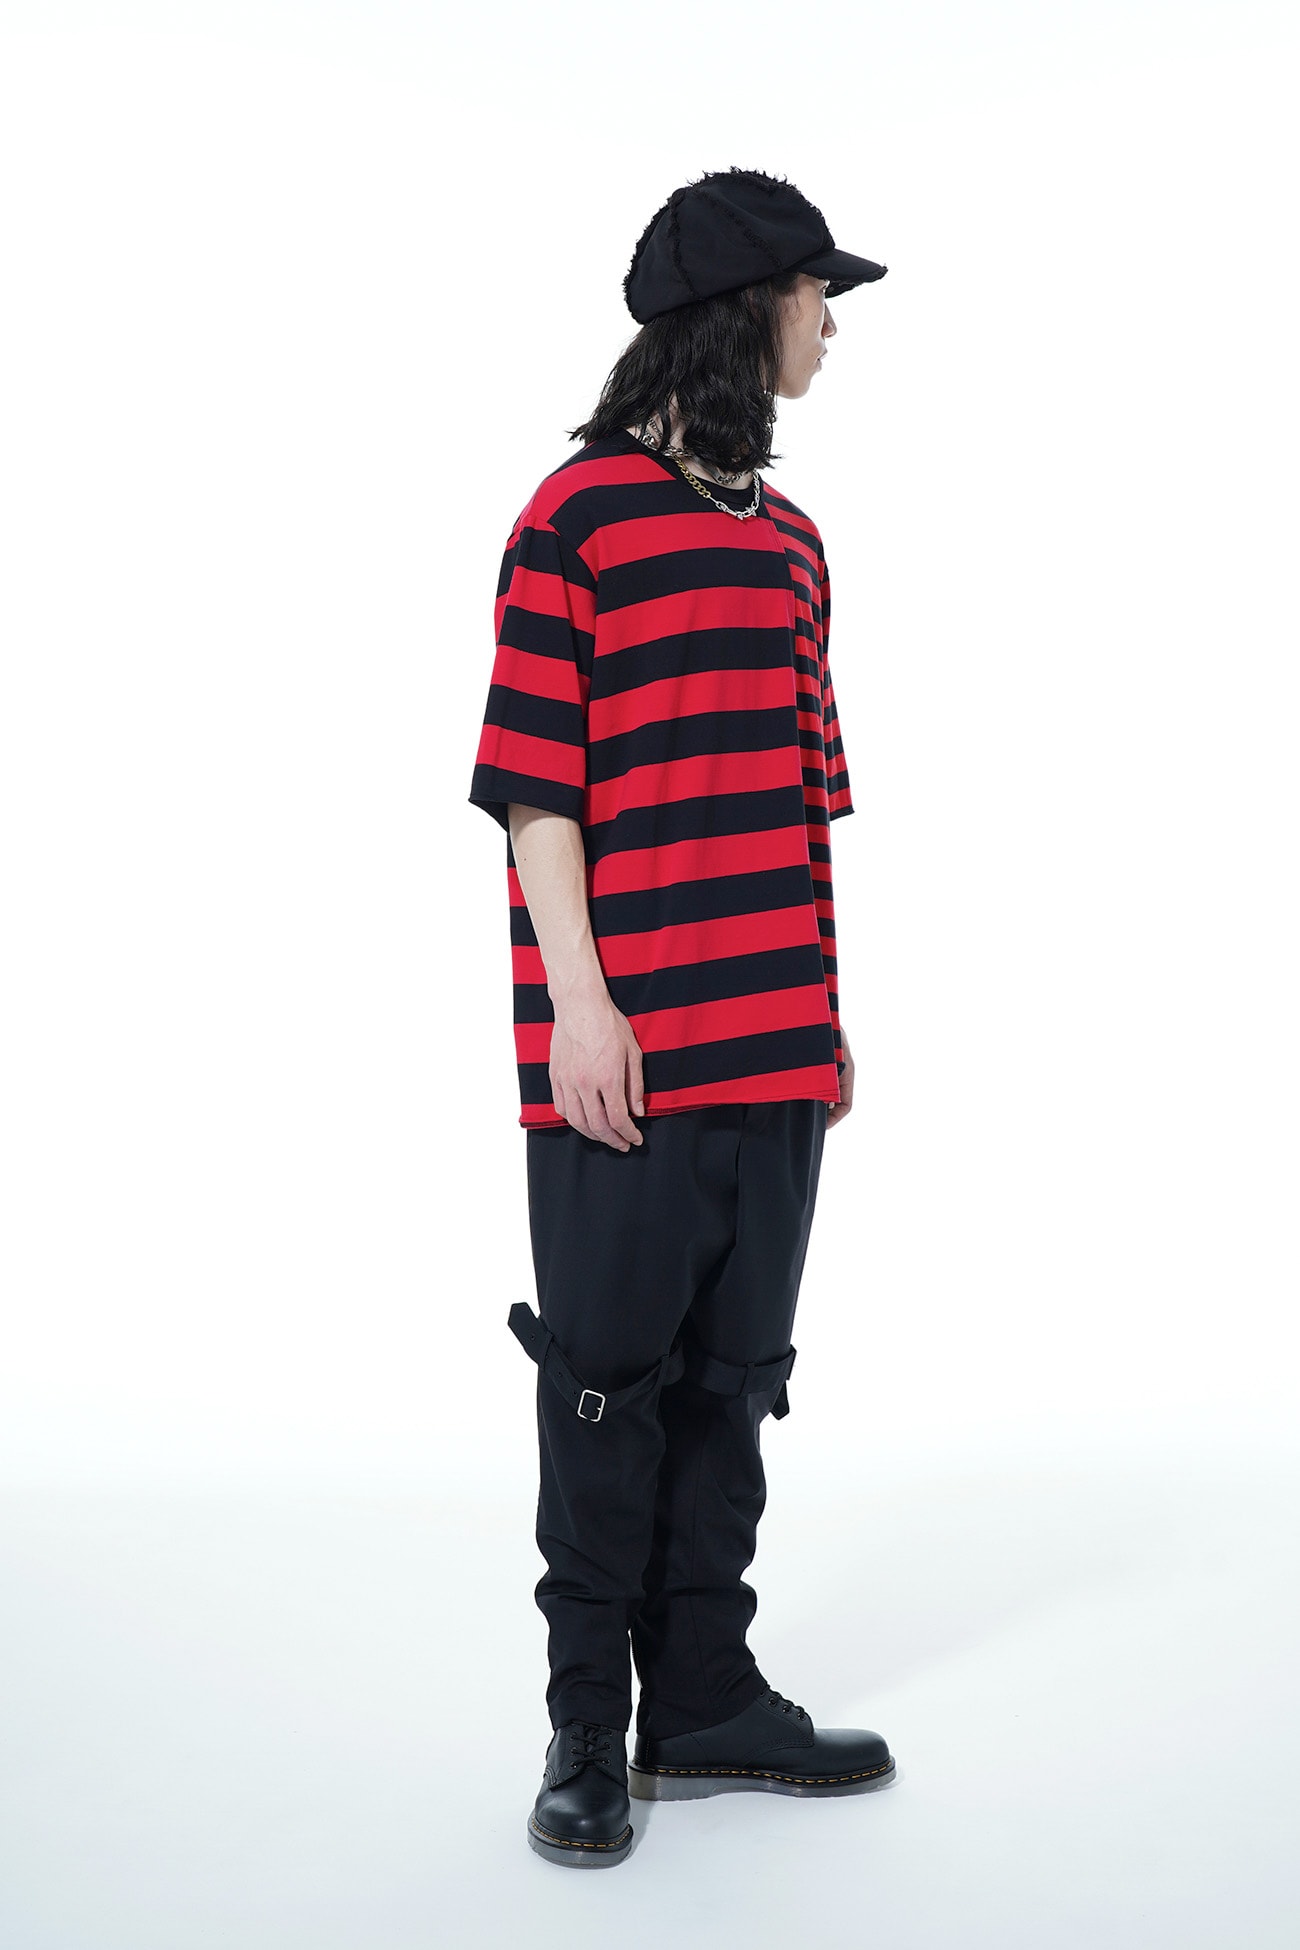 Staggered Horizontal Stripes Asymmetry T-Shirts